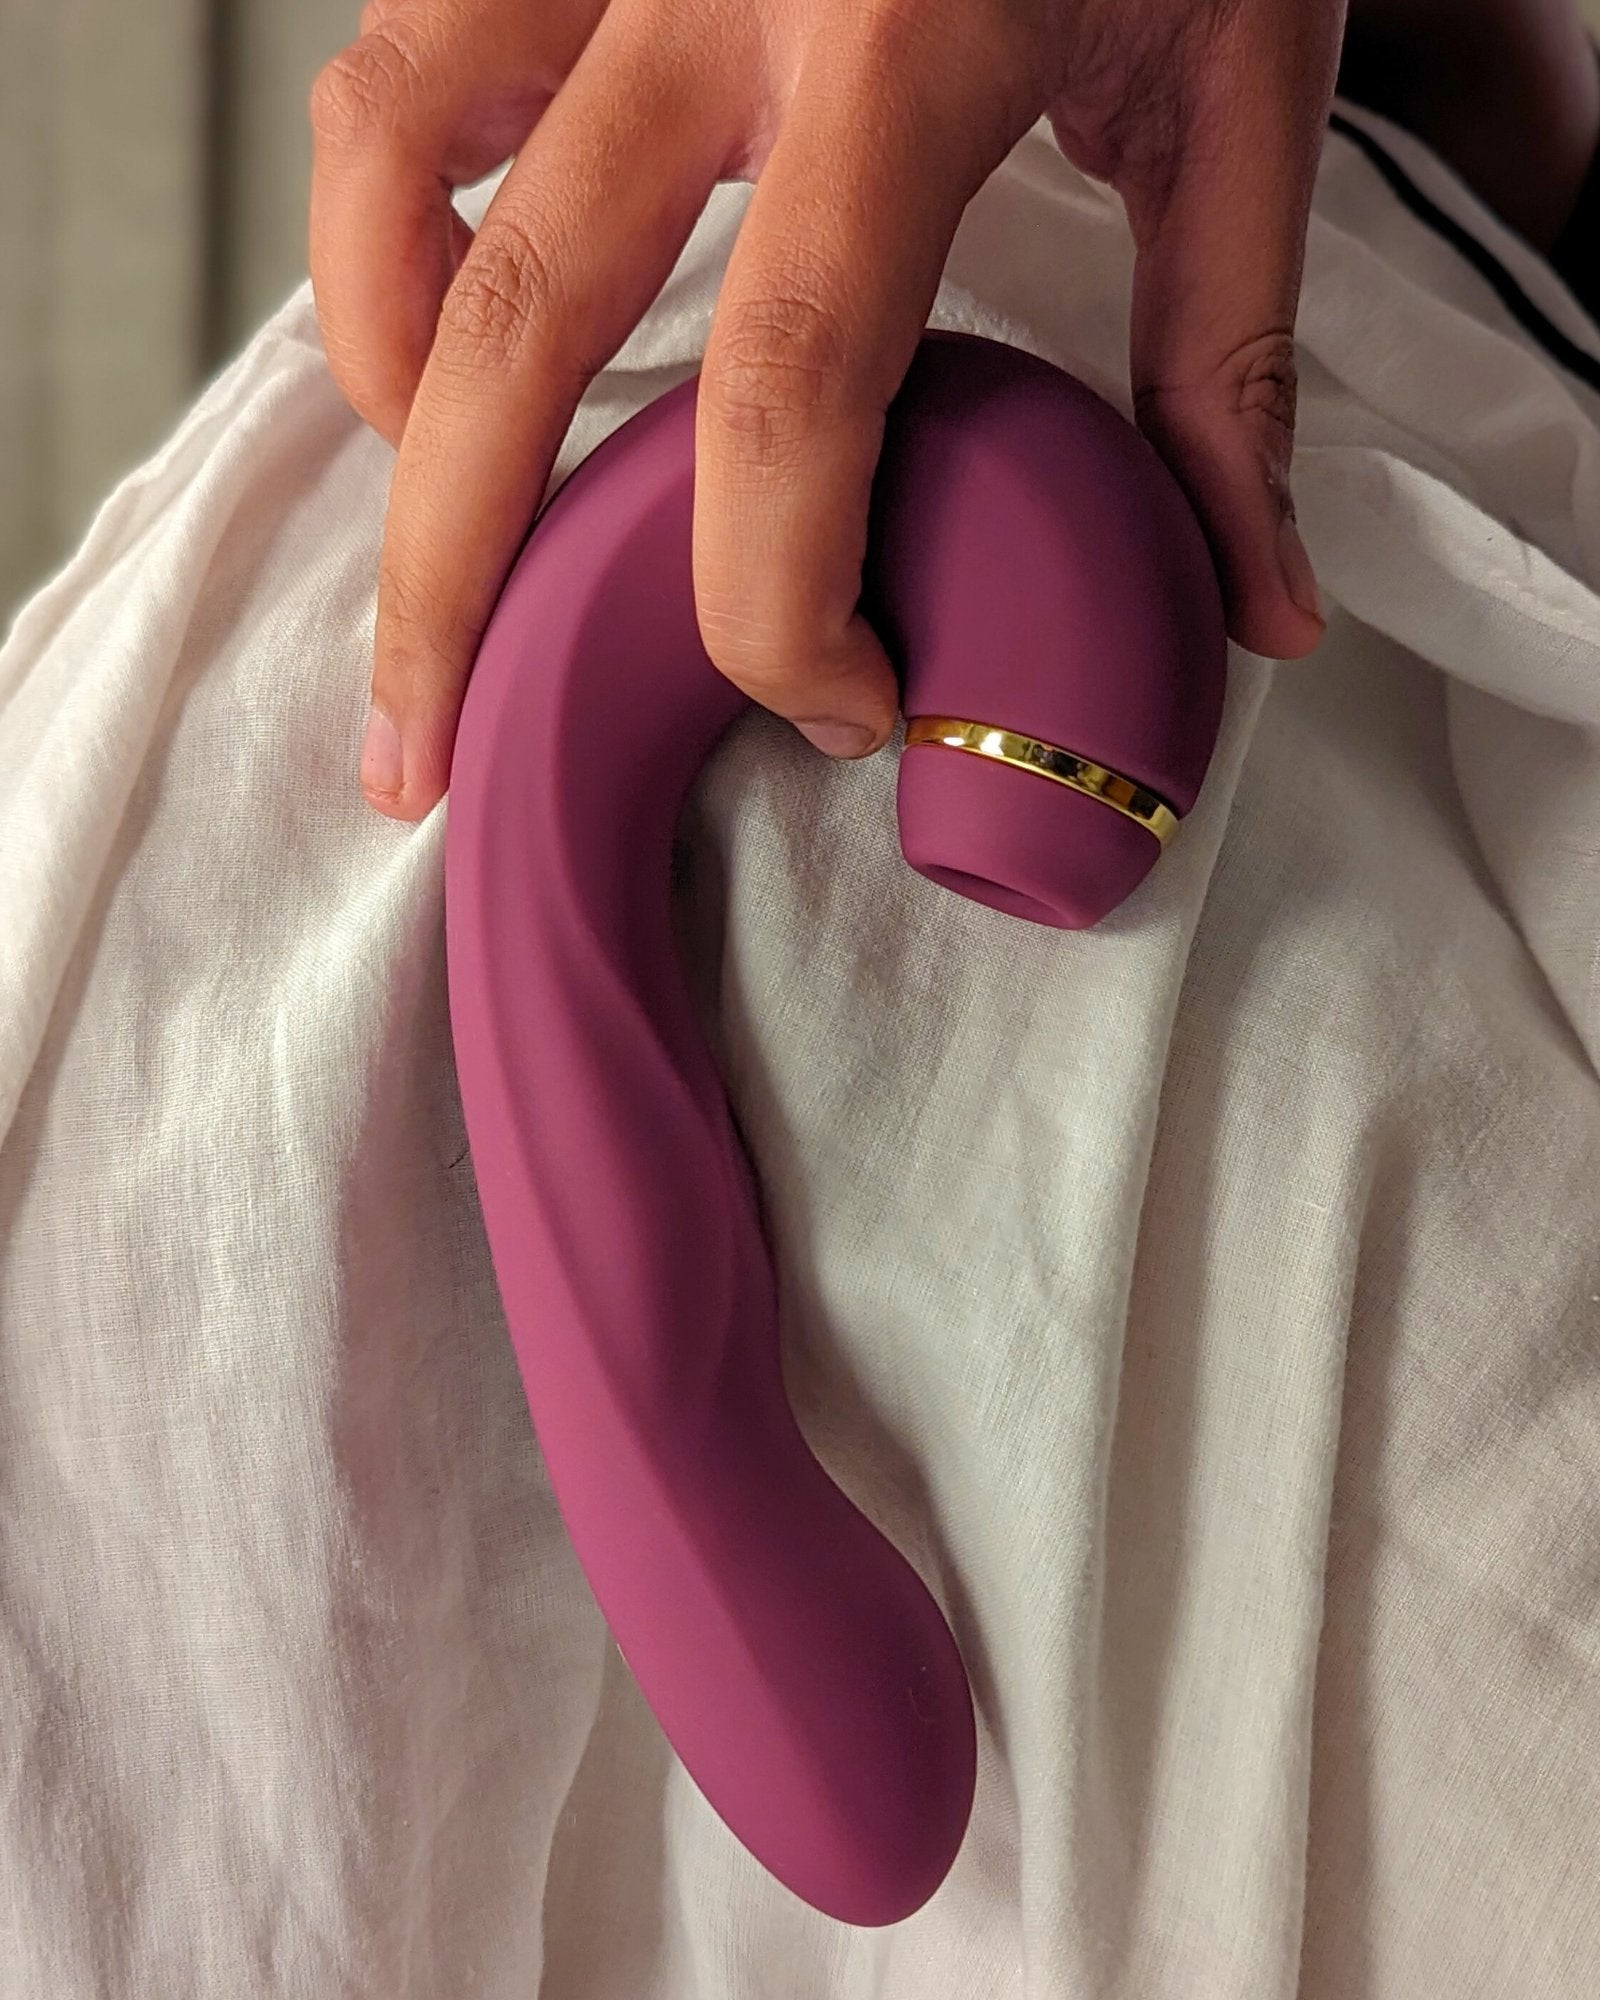 Sangya 39 Plus - Ideal sex toy for both homosexual and heterosexual couples